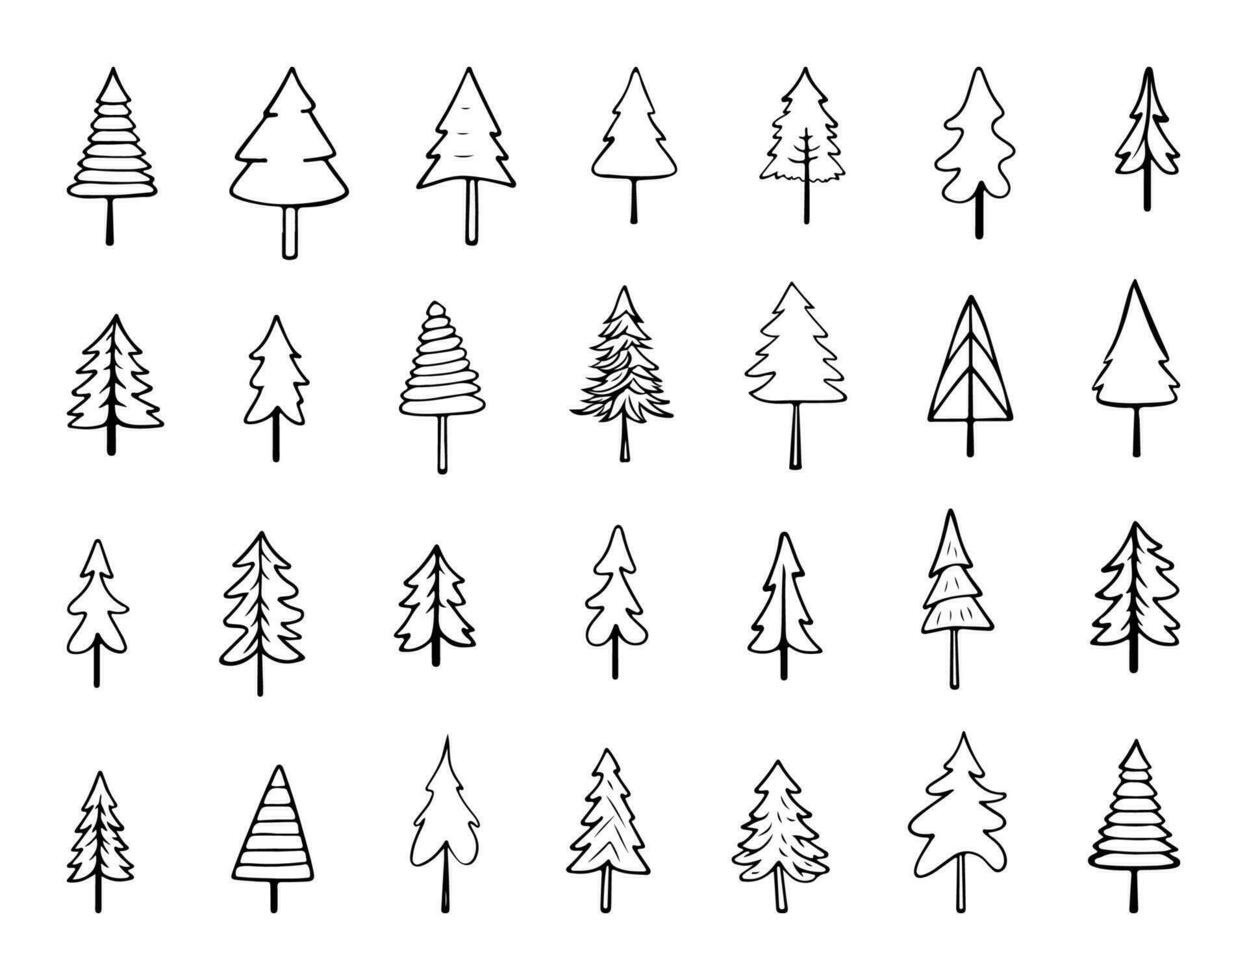 Big Hand Drawn Christmas Trees Doodle Set. Vector Editable Illustration. Black contour of Spruces isolated on white background